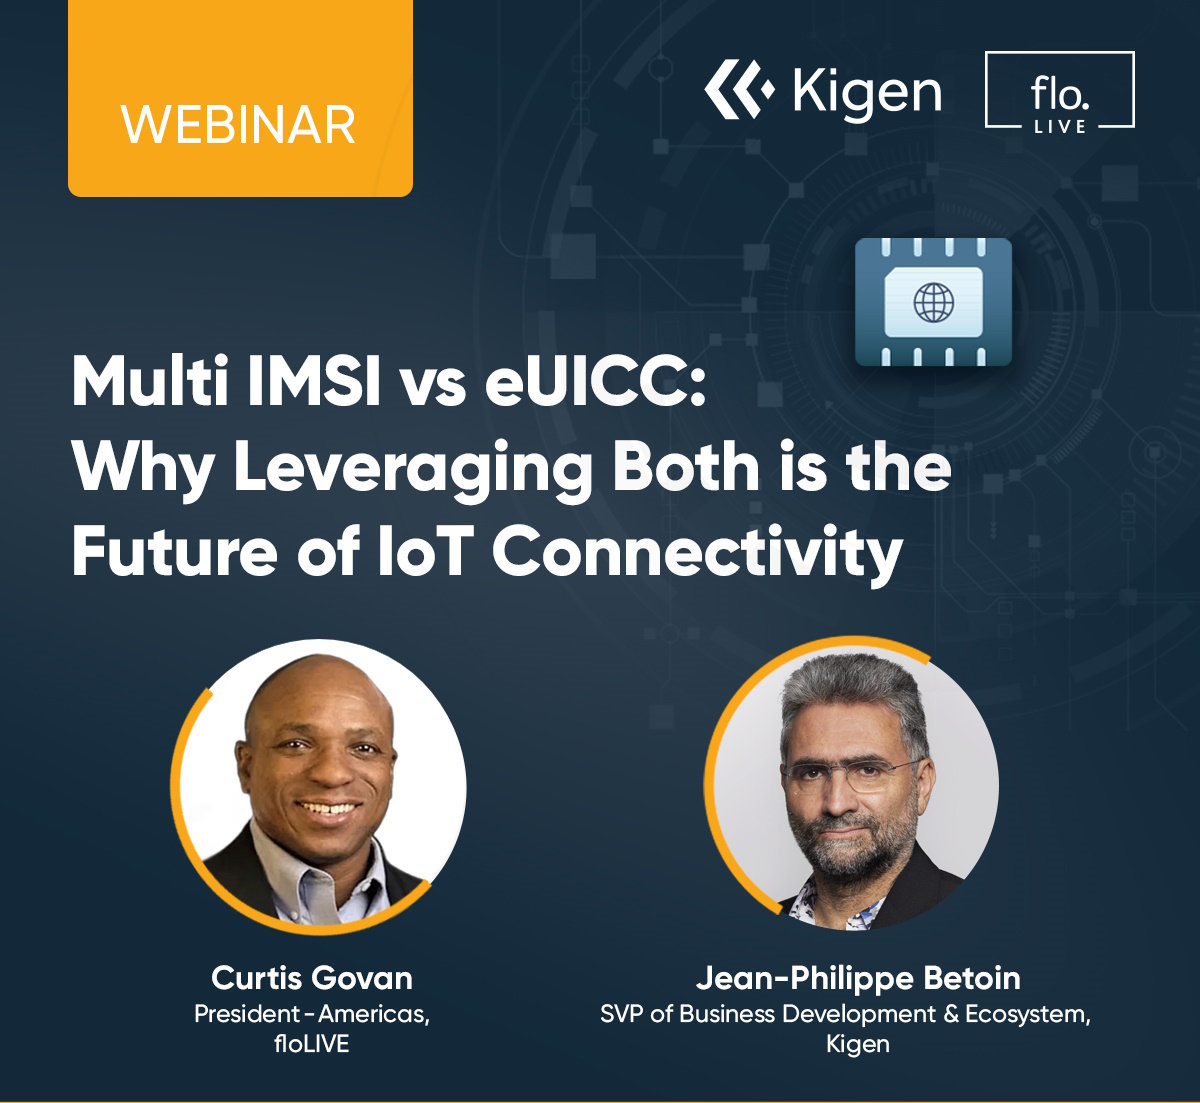 Multi-IMSI vs eUICC: Why Leveraging Both is the Future of IoT Connectivity image